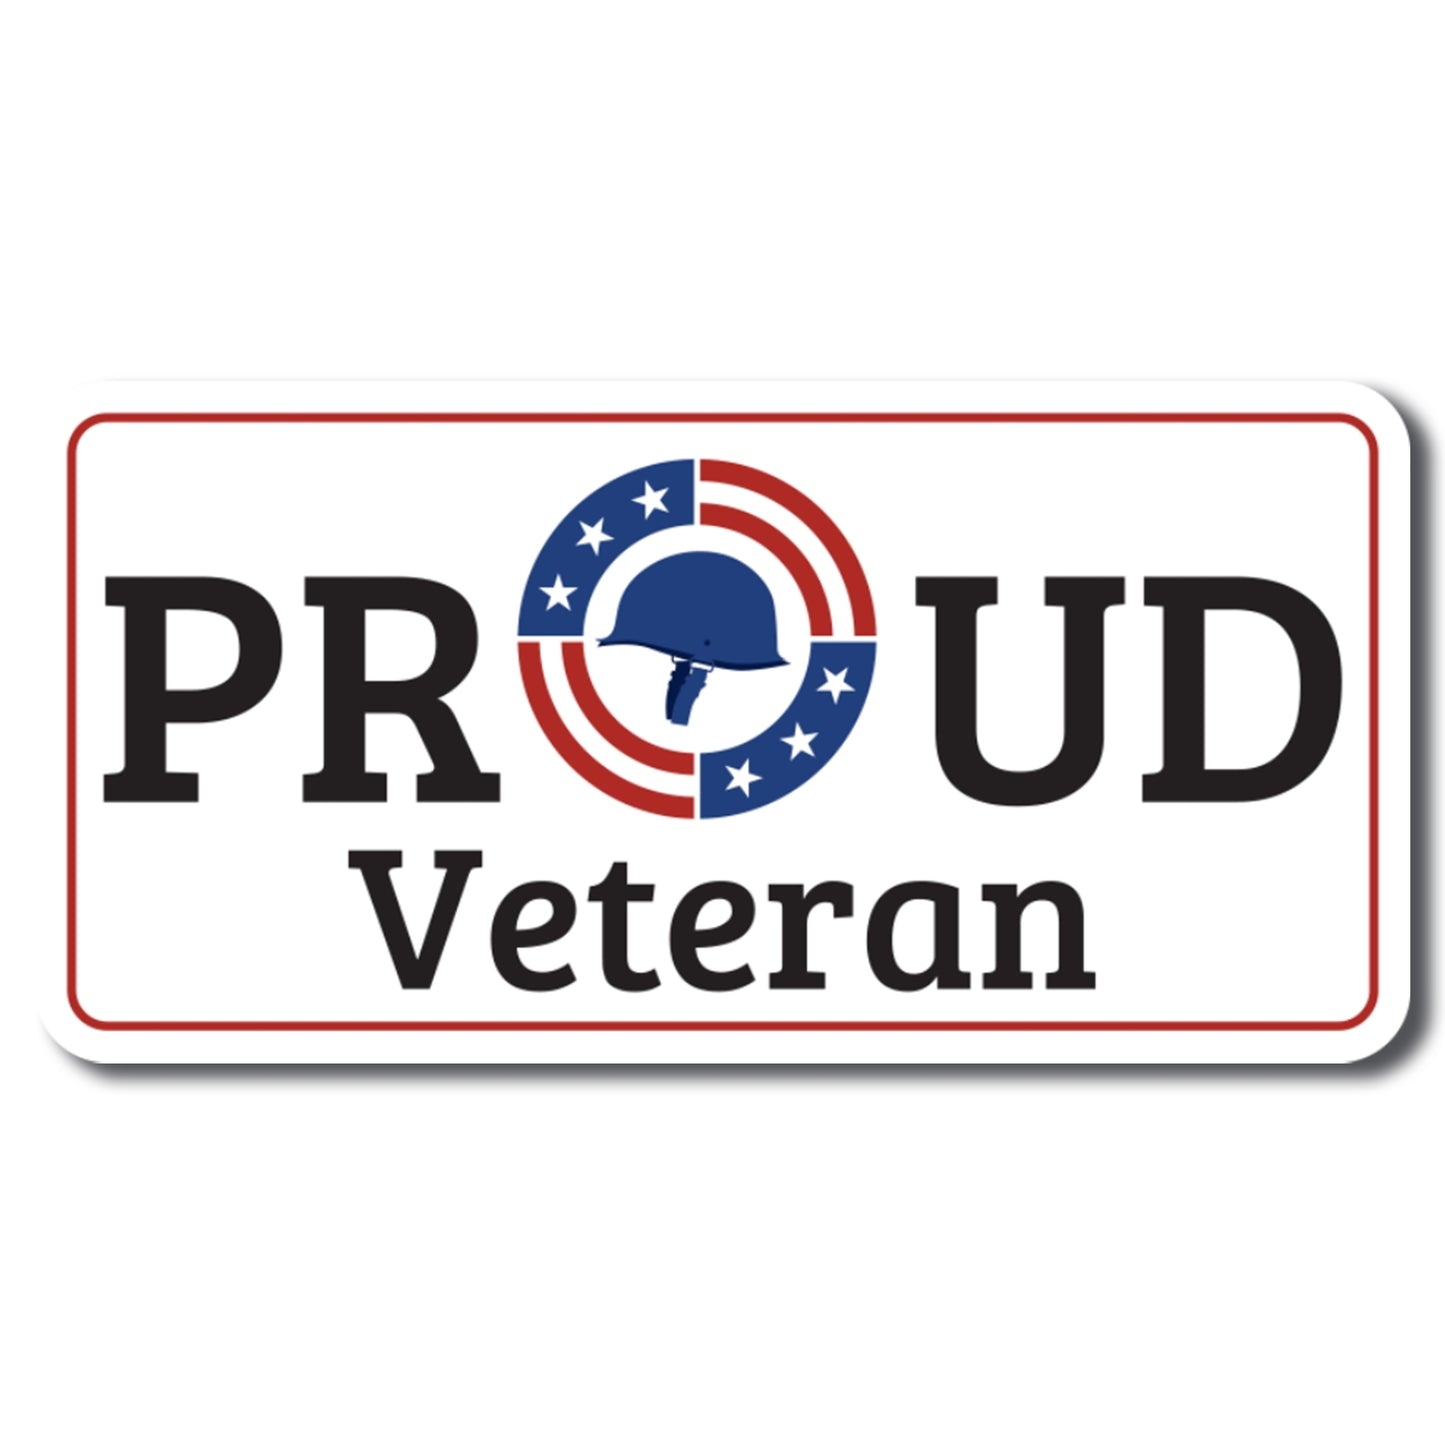 Magnet Me Up Proud Veteran Patriotic Military Magnet Decal, 6.5x3 Inch, Perfect for Car, Truck, SUV Or Any Magnetic Surface, Gift, in Support of Veterans, Active Duty, Armed Forces